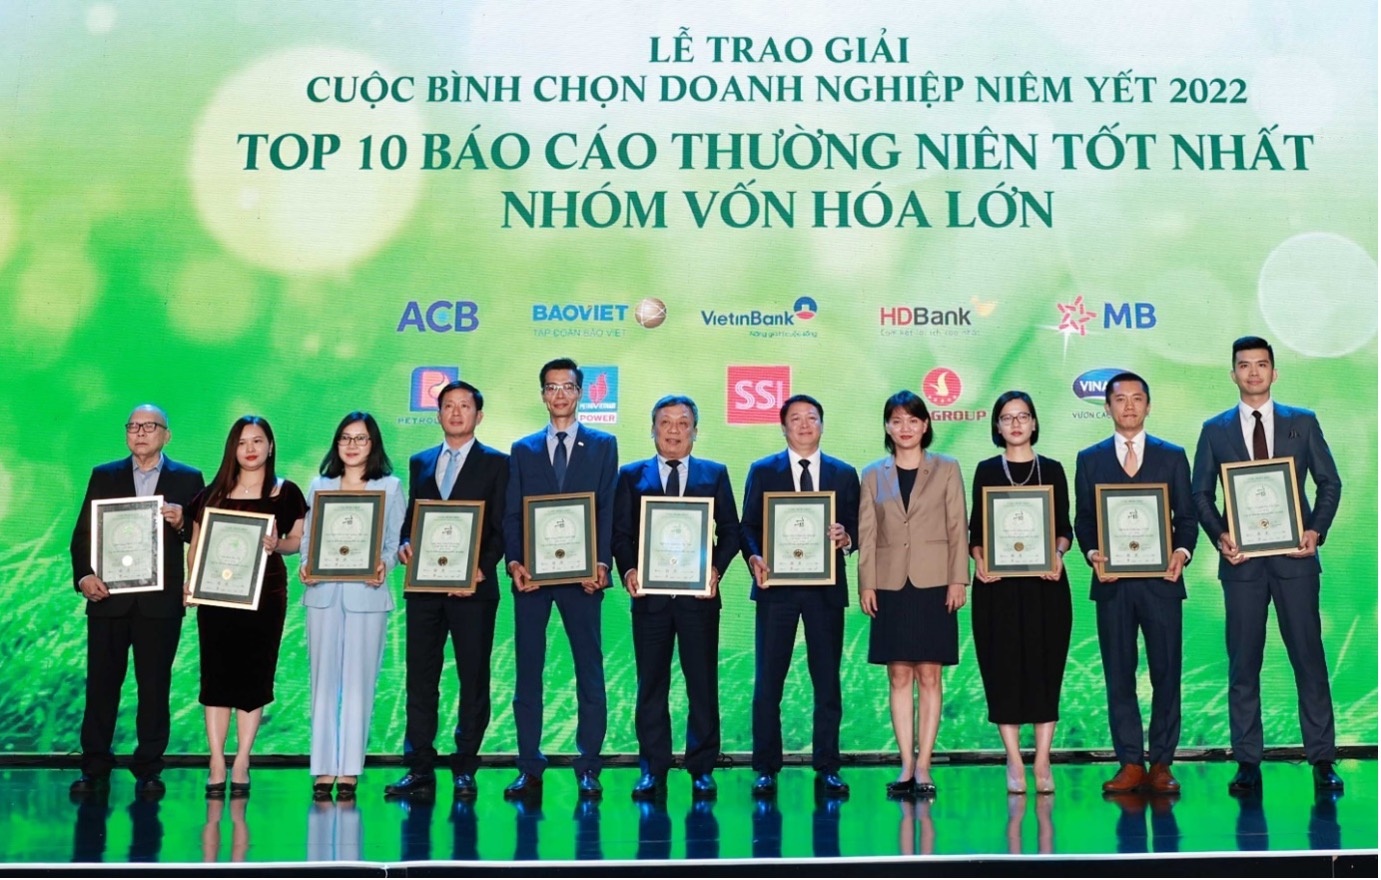 MB listed among top companies with best annual reports in Vietnam